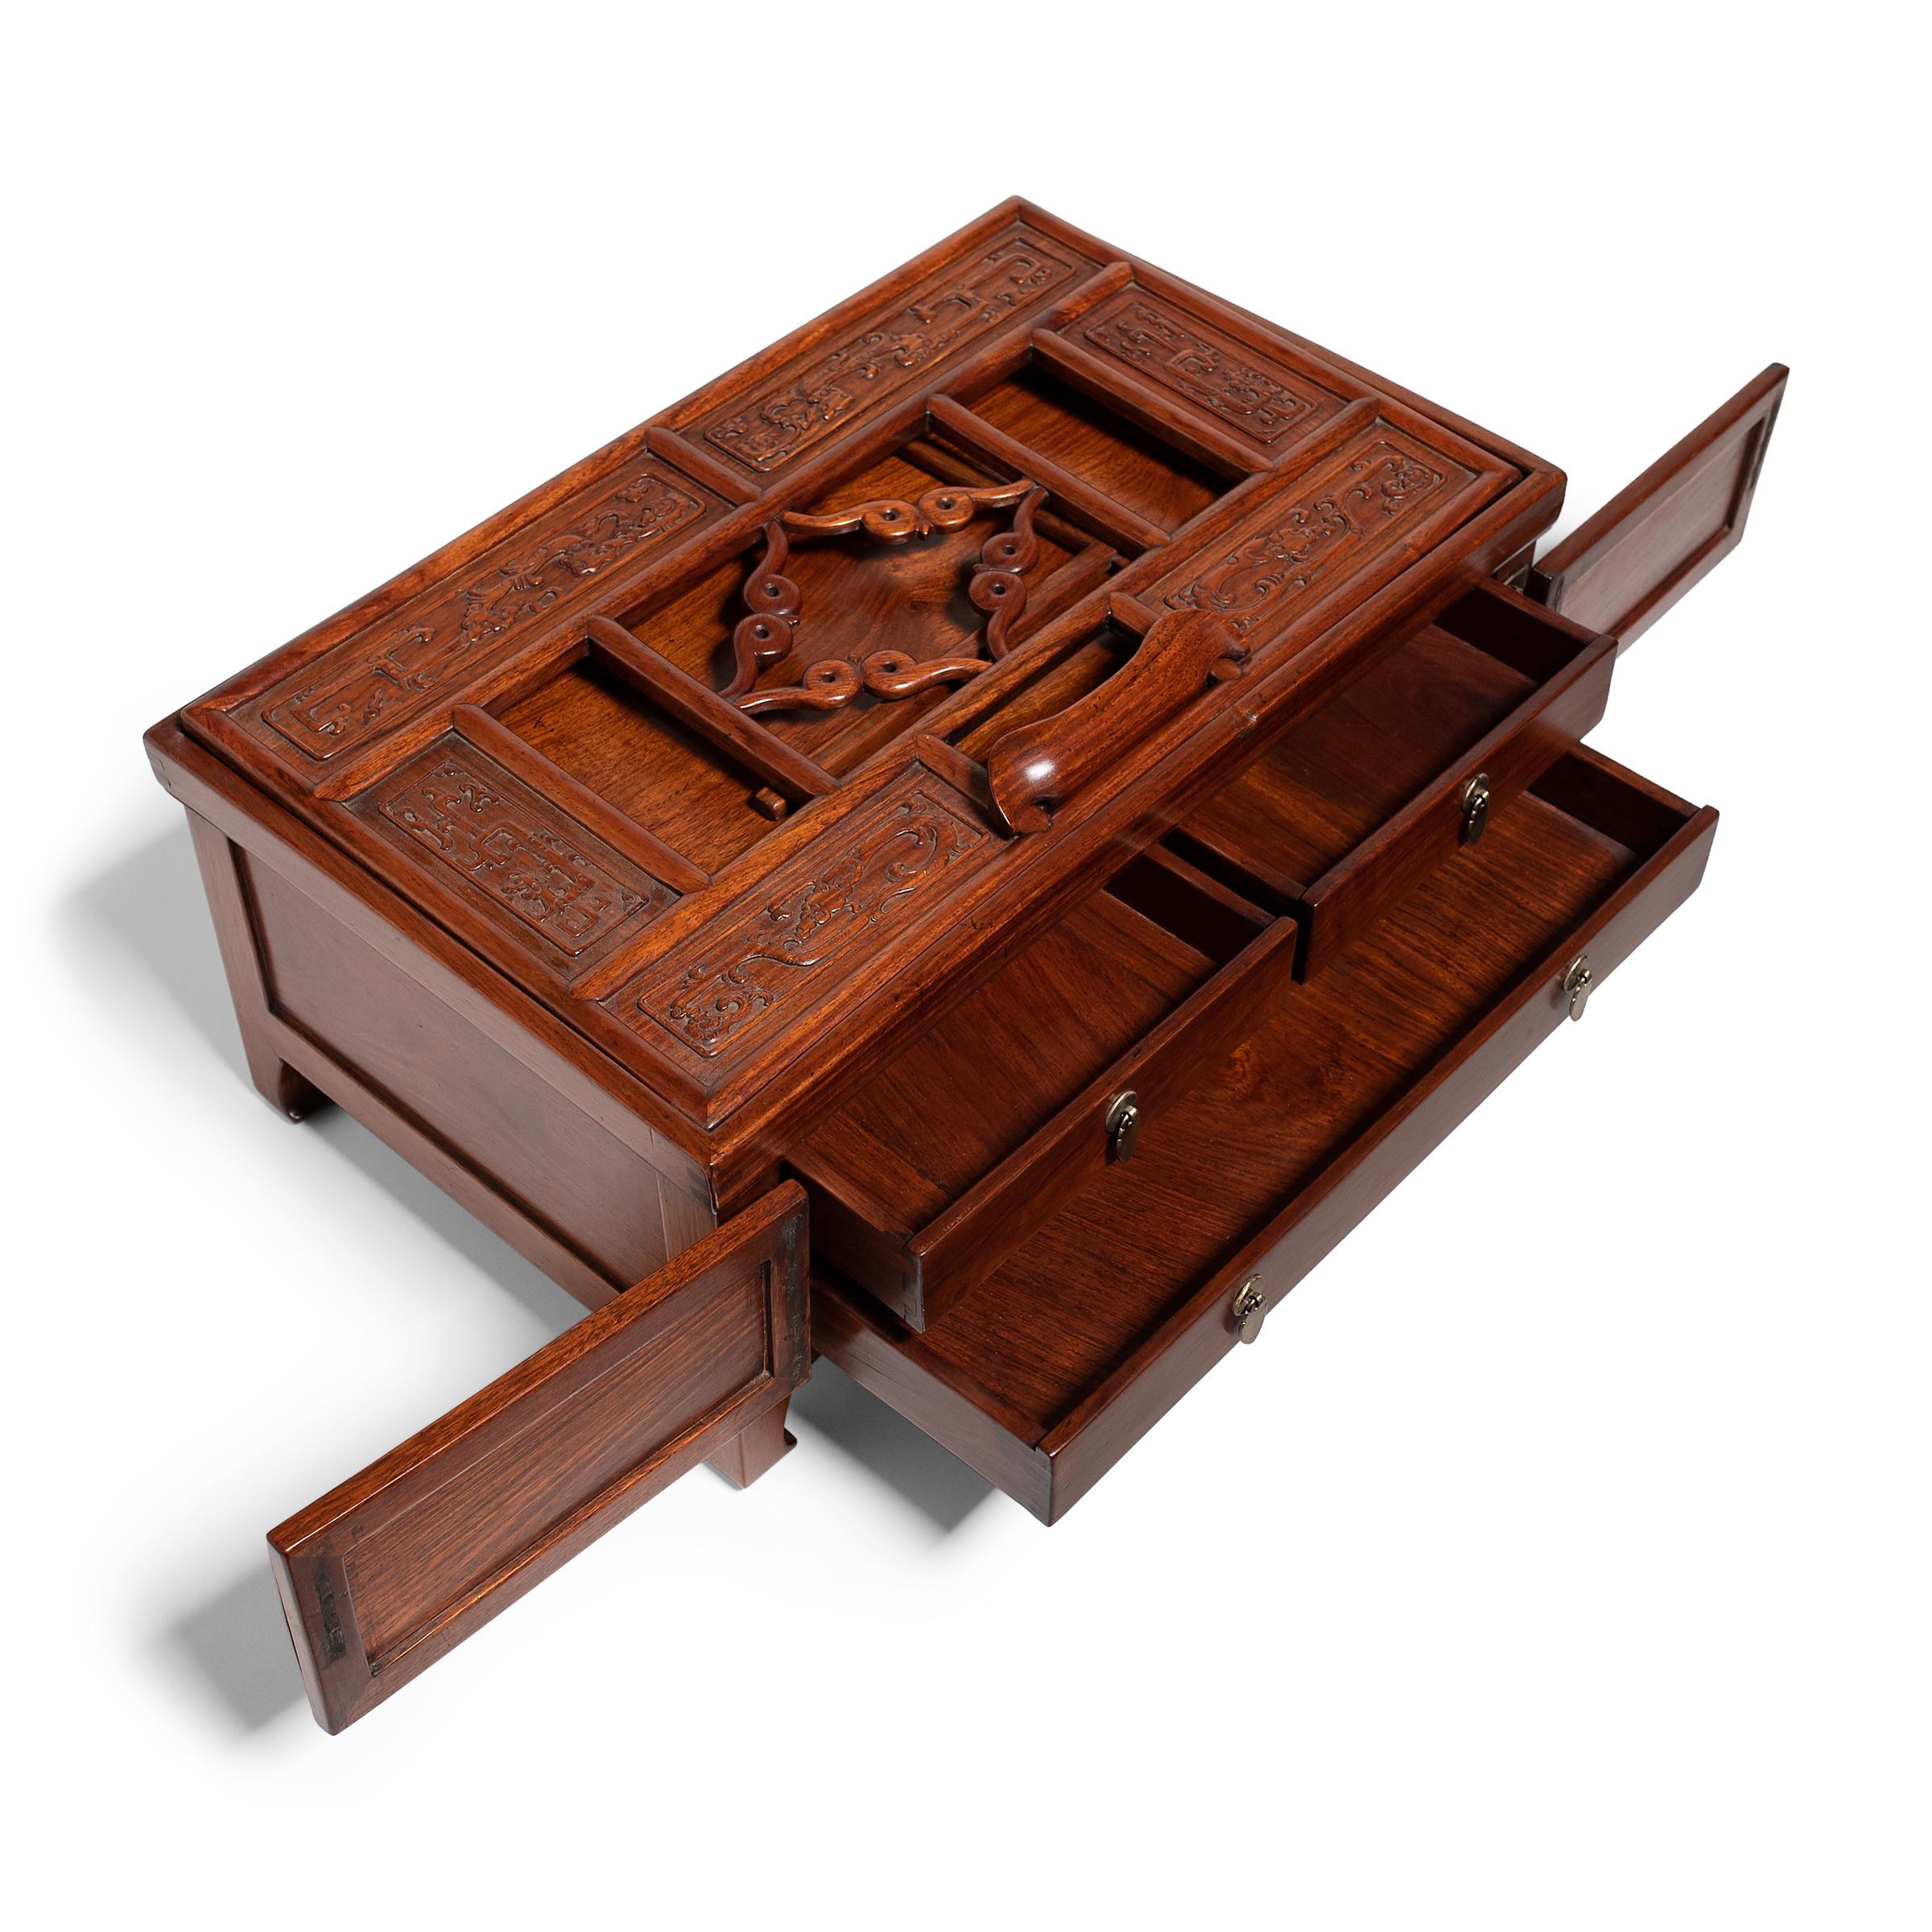 Hardwood Chinese Huanghuali Mirror Stand with Cosmetics Case, c. 1850